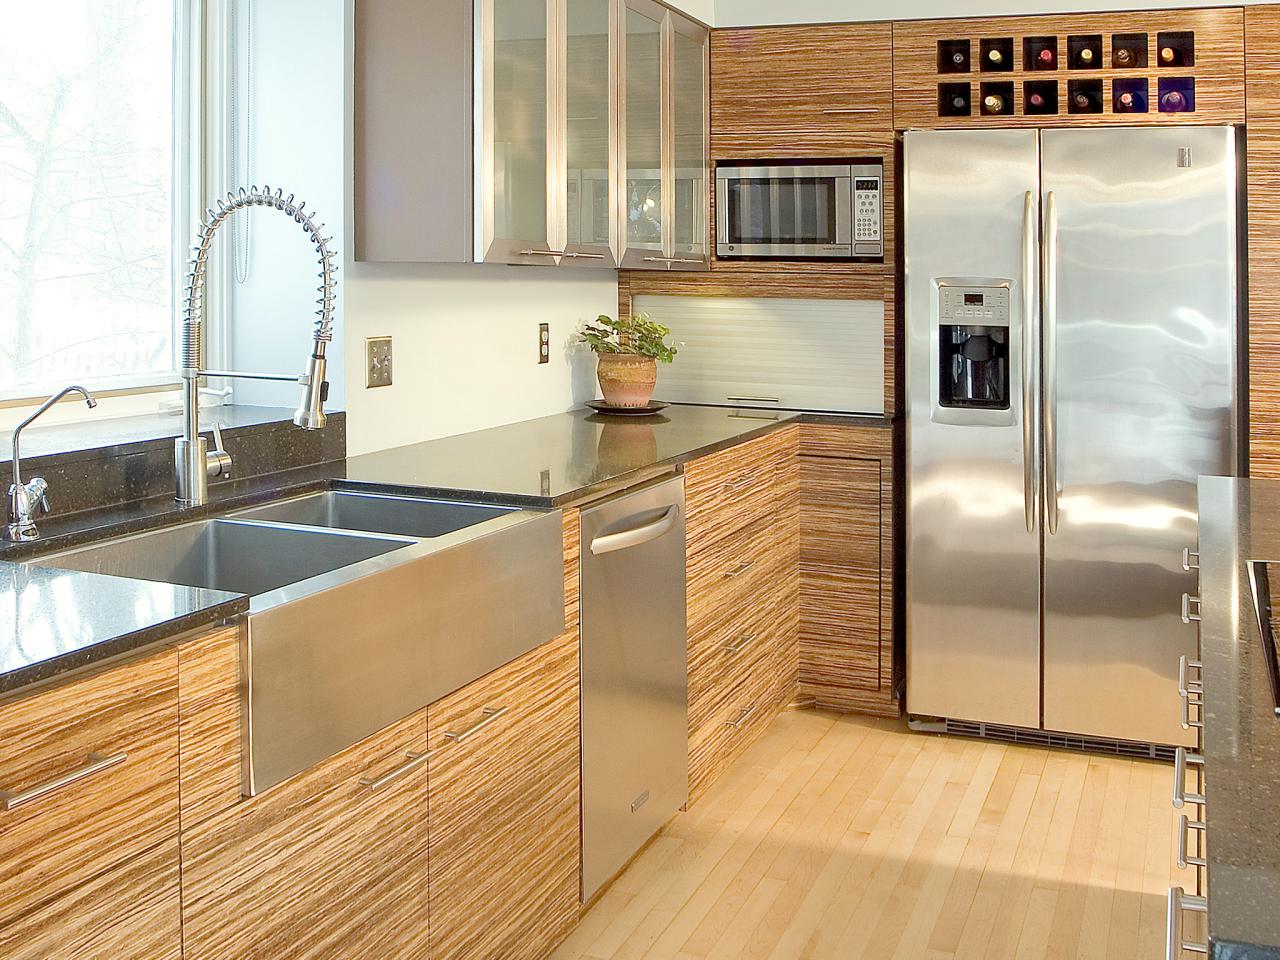 bamboo kitchen cabinets: pictures, options, tips & ideas | hgtv